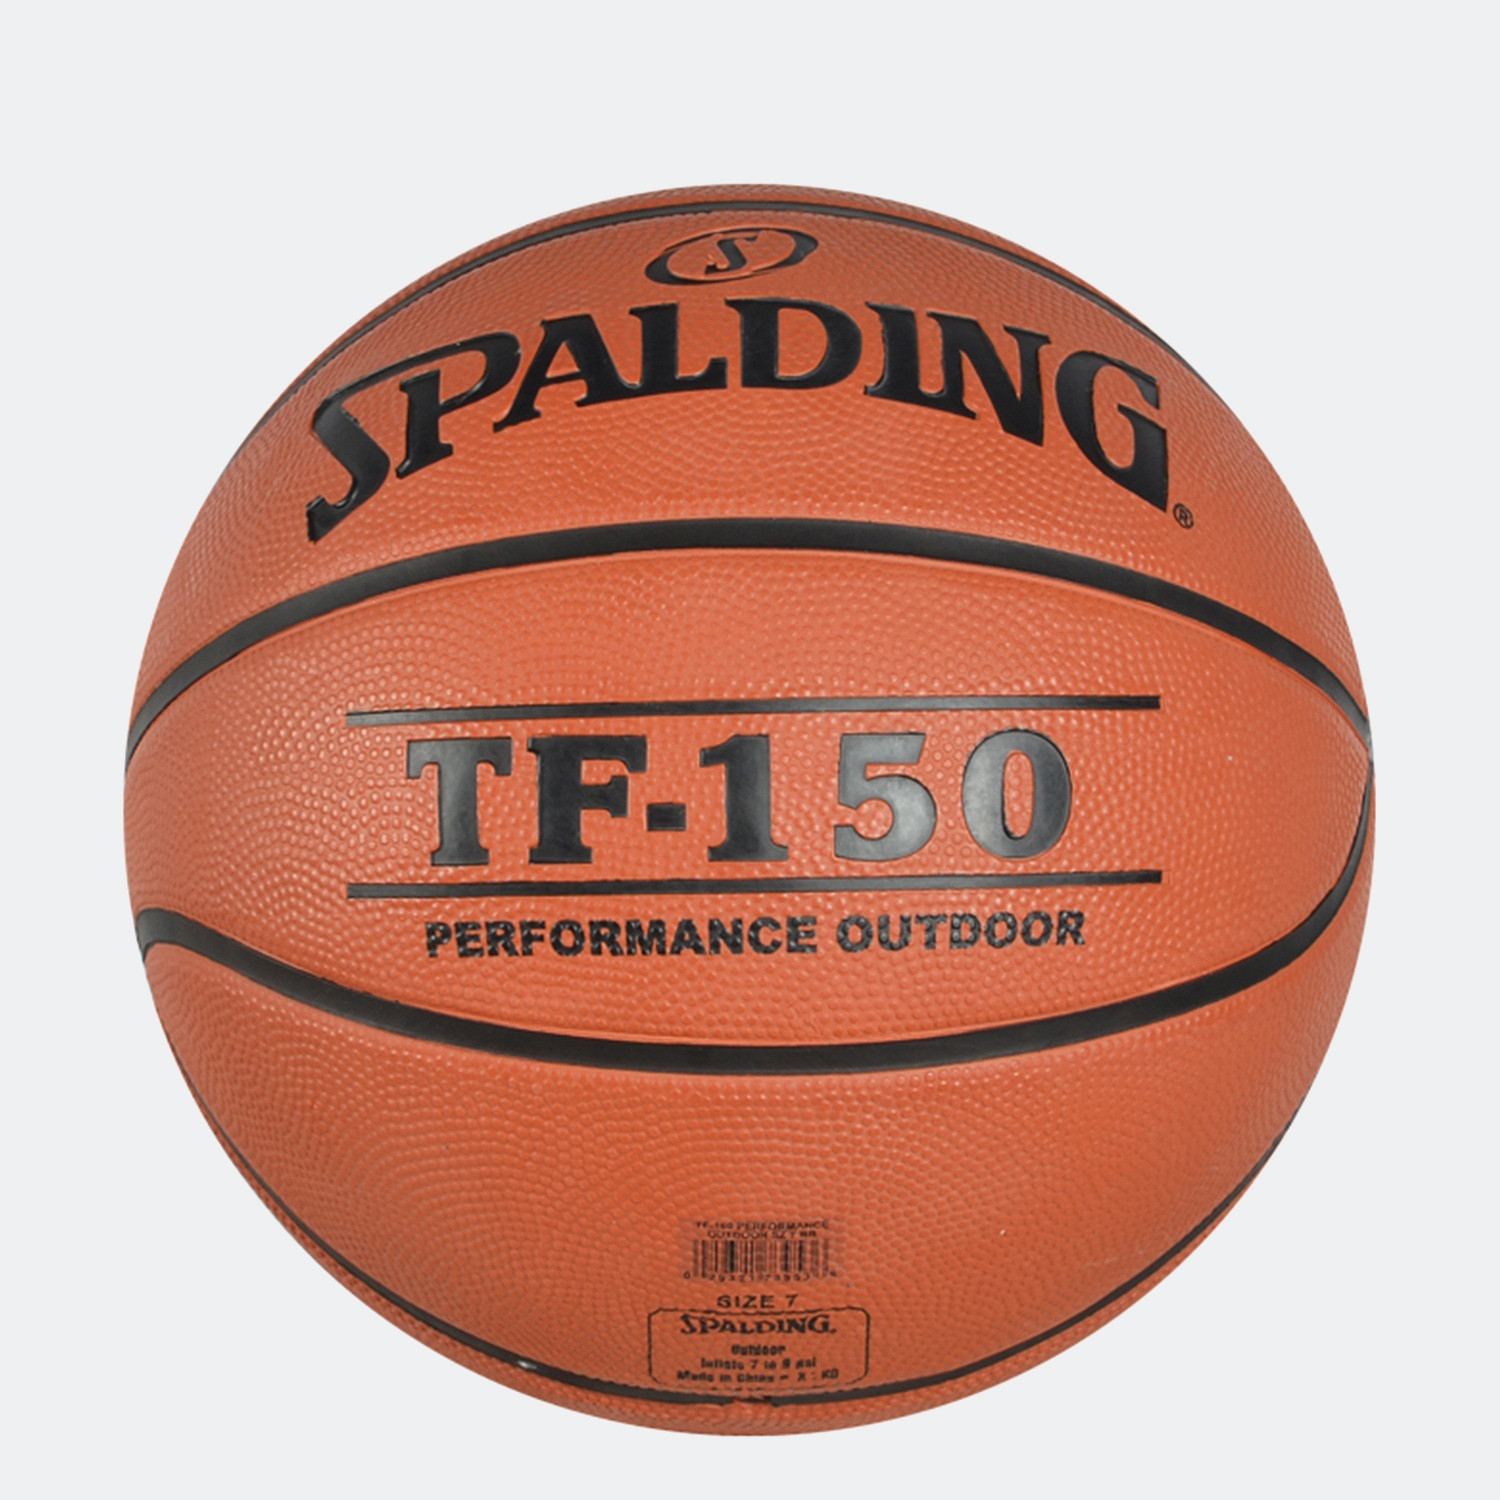 Spalding Tf-150 Performance Rubber Basketball No7 (3024500062_005)